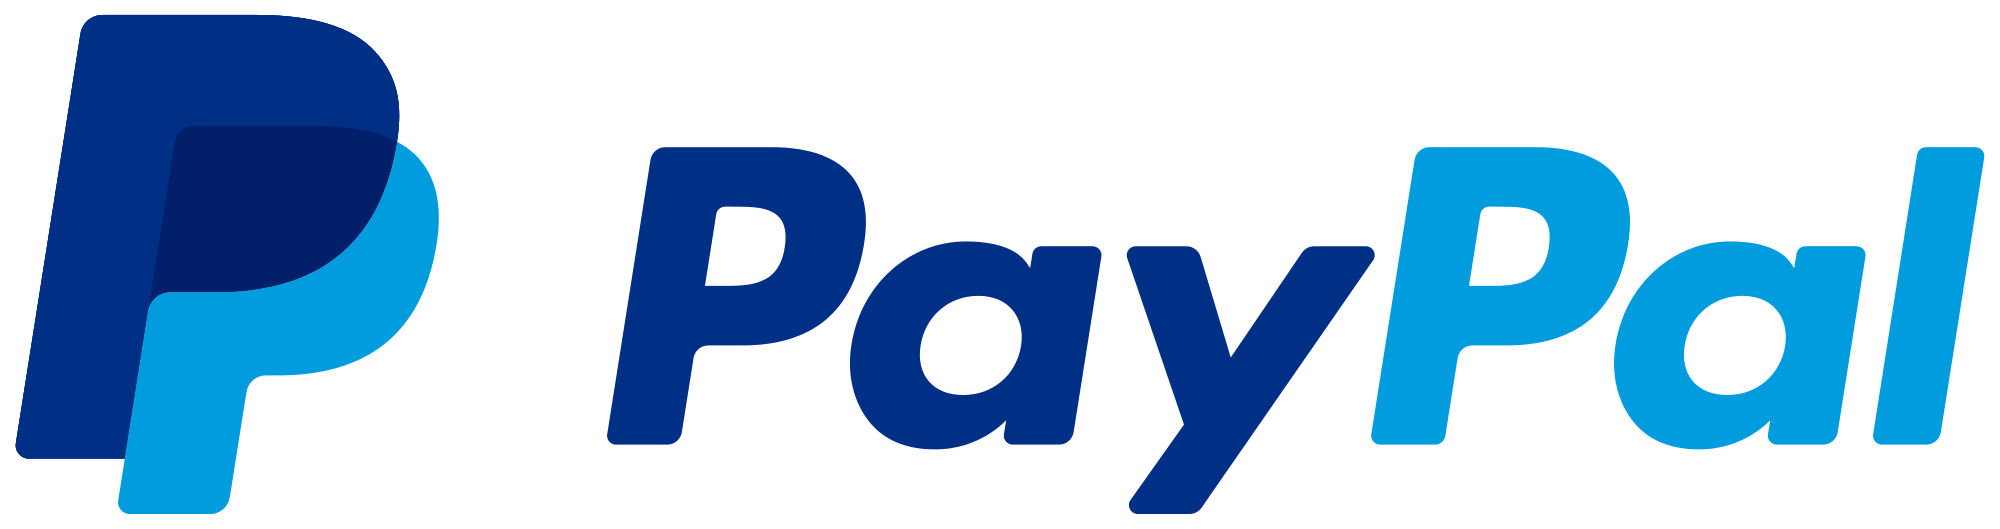 Pay with Venmo Logo - Venmo Logo Png - Shared by Tyrell | Scalsys